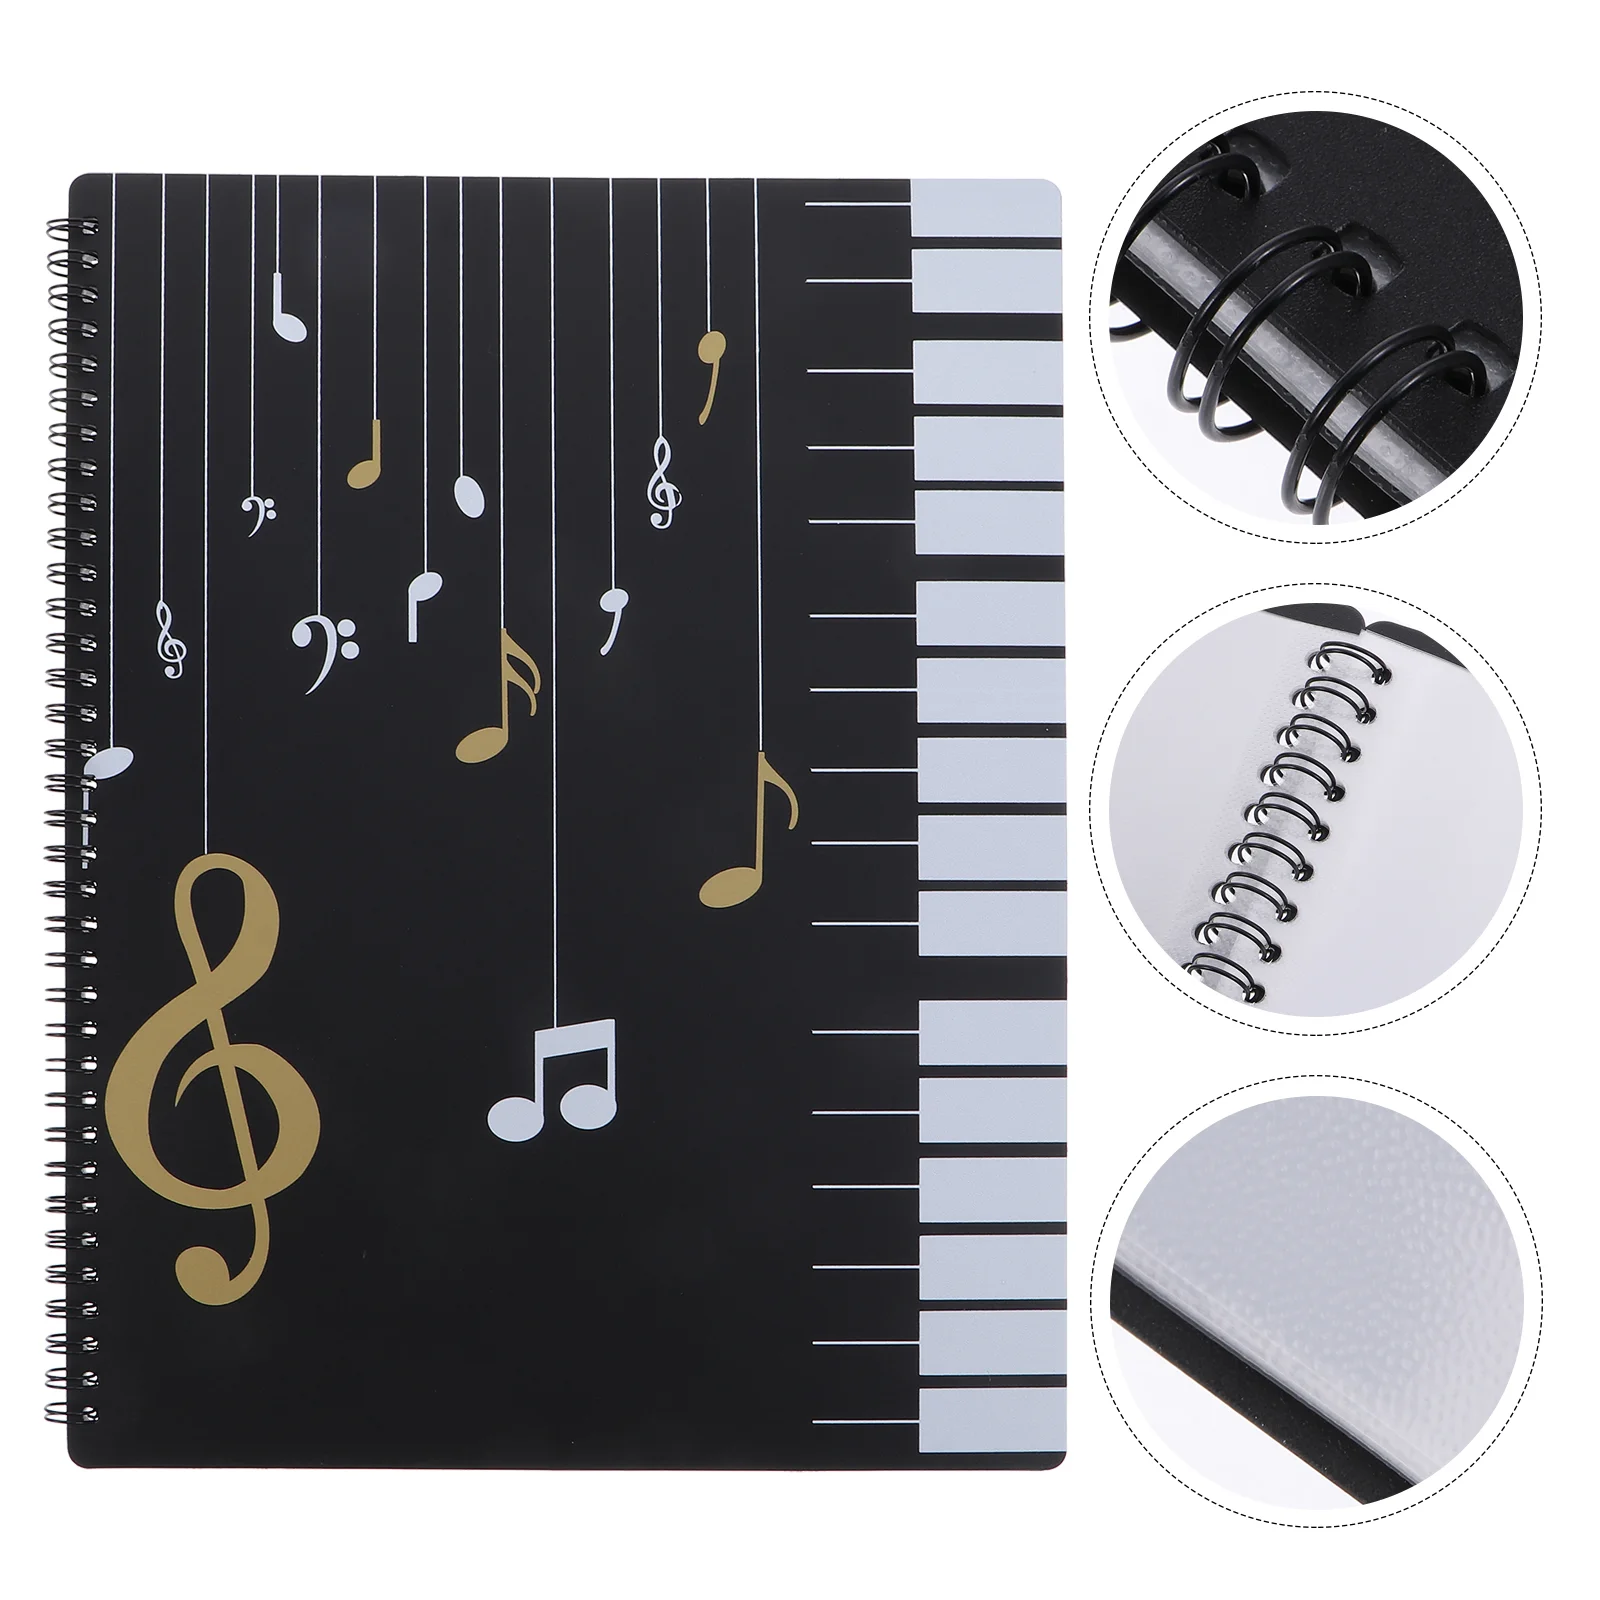 

Folder Music File Sheet A4 Holder Document Paper Clip Book Office Folders Band Pages Documents Storage Choral Choir Bill Files